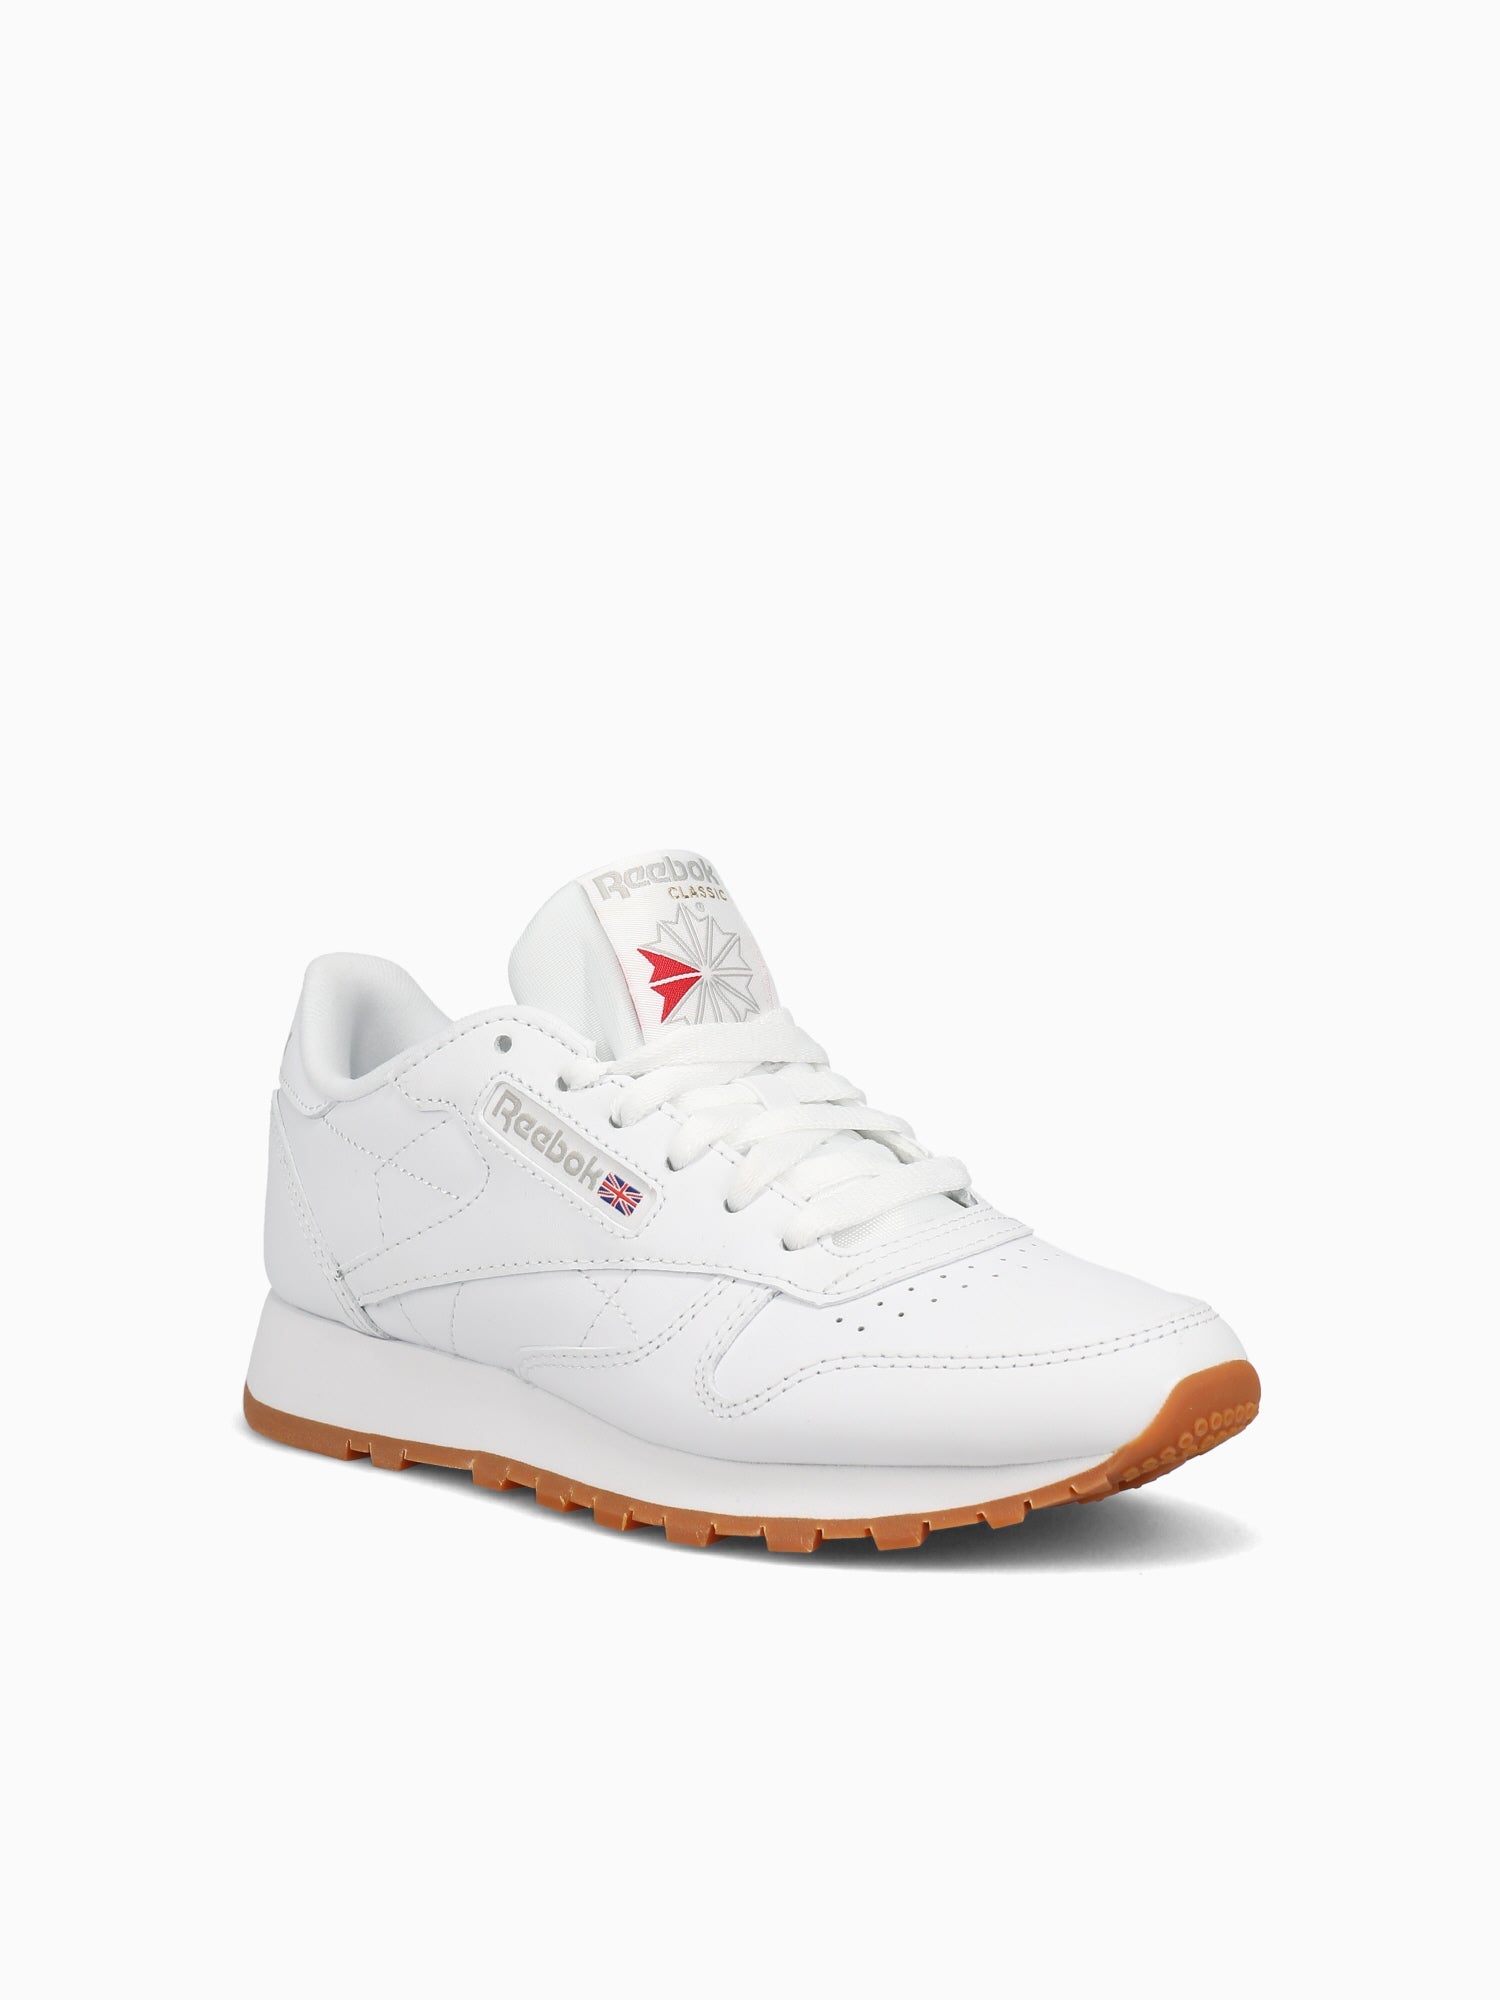 Classic Leather Wht Grey Gum leather White / 5 / M